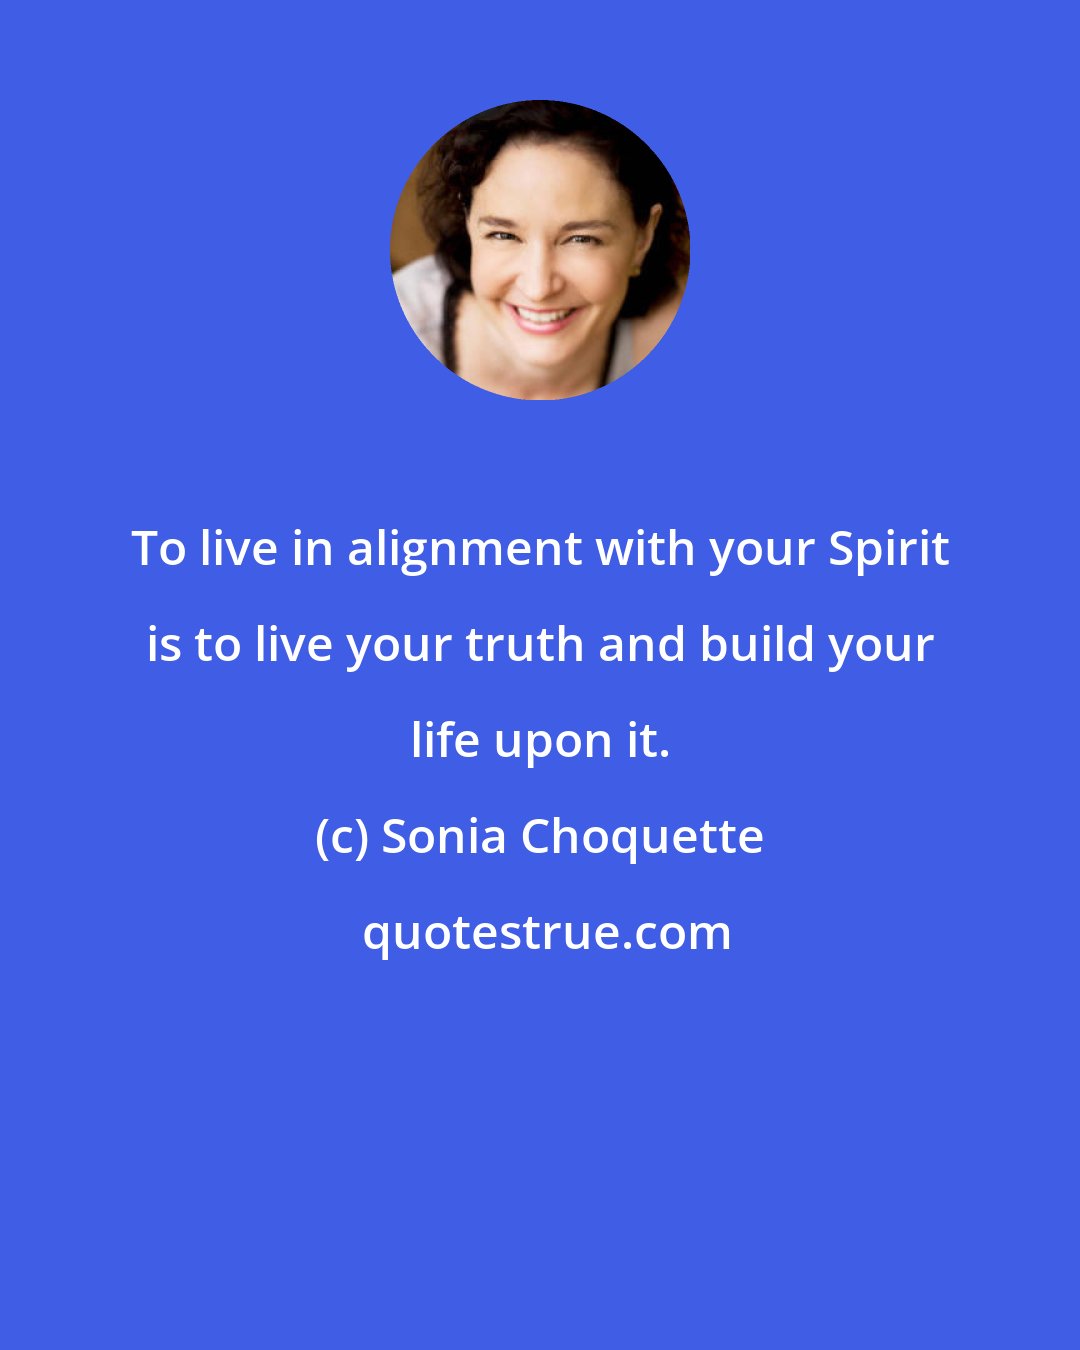 Sonia Choquette: To live in alignment with your Spirit is to live your truth and build your life upon it.